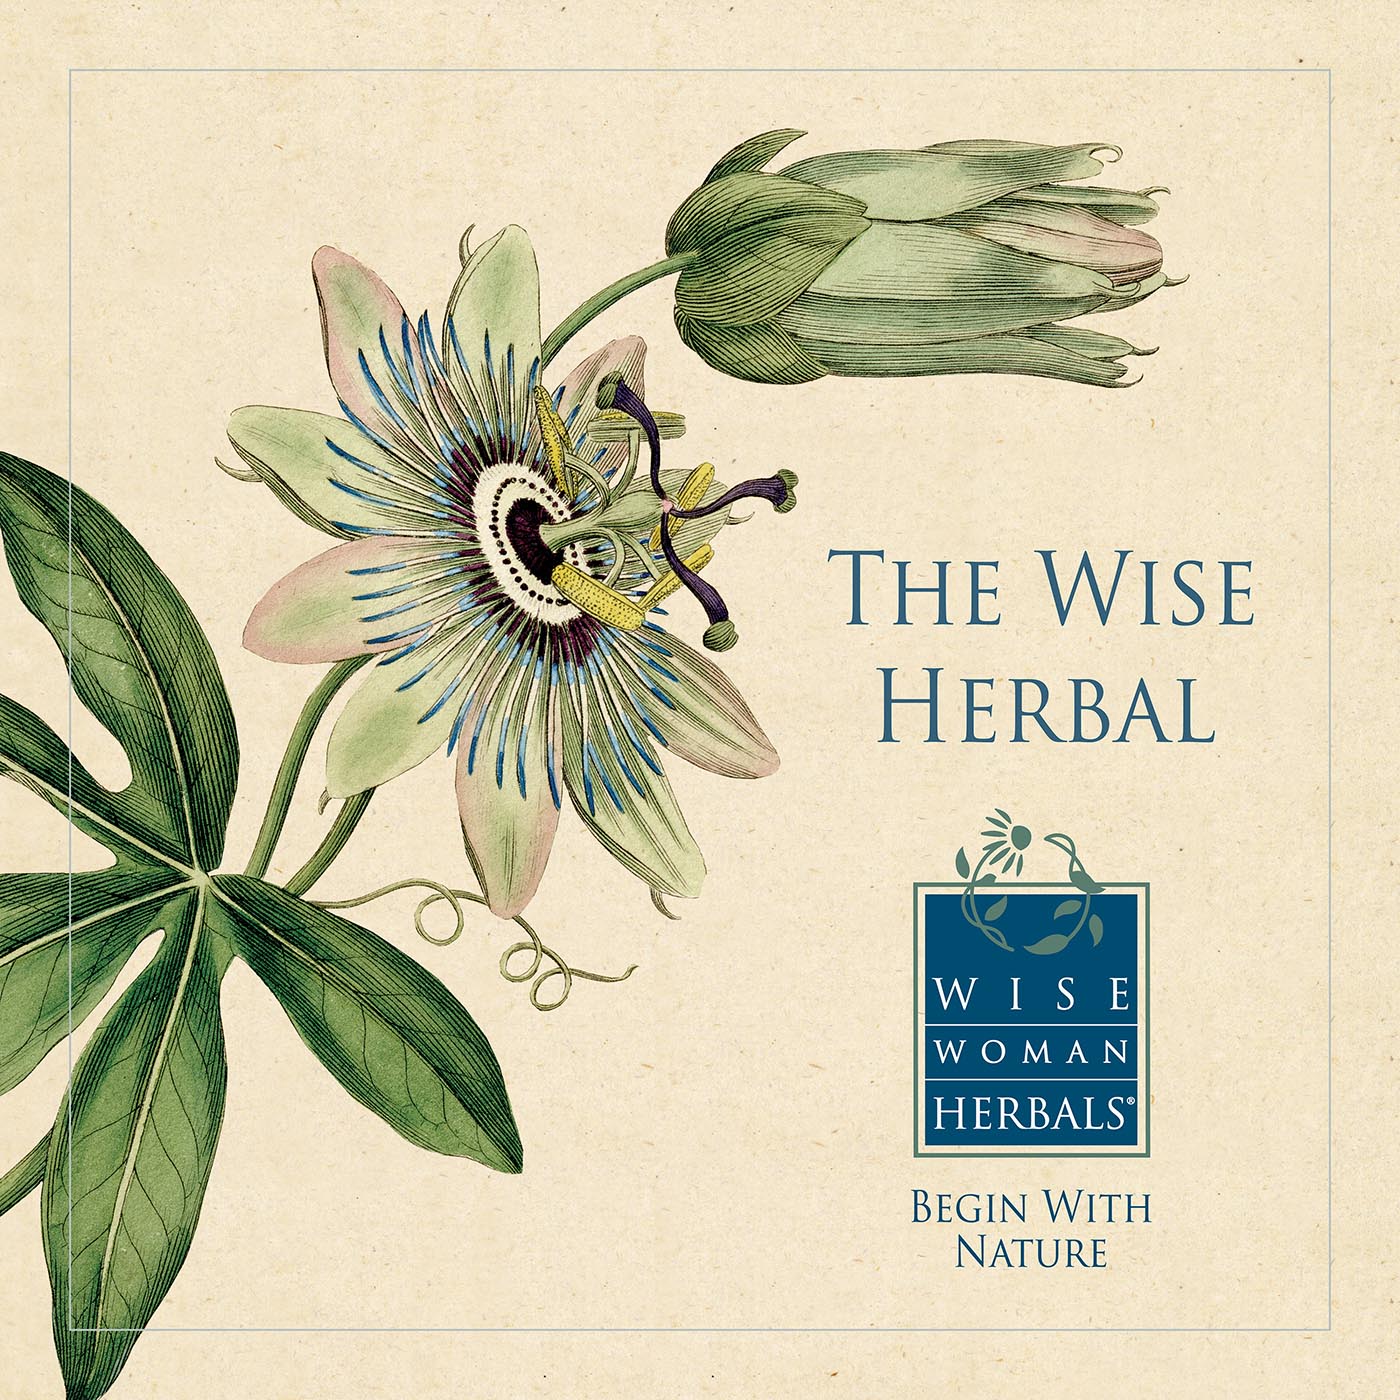 The Wise Herbal